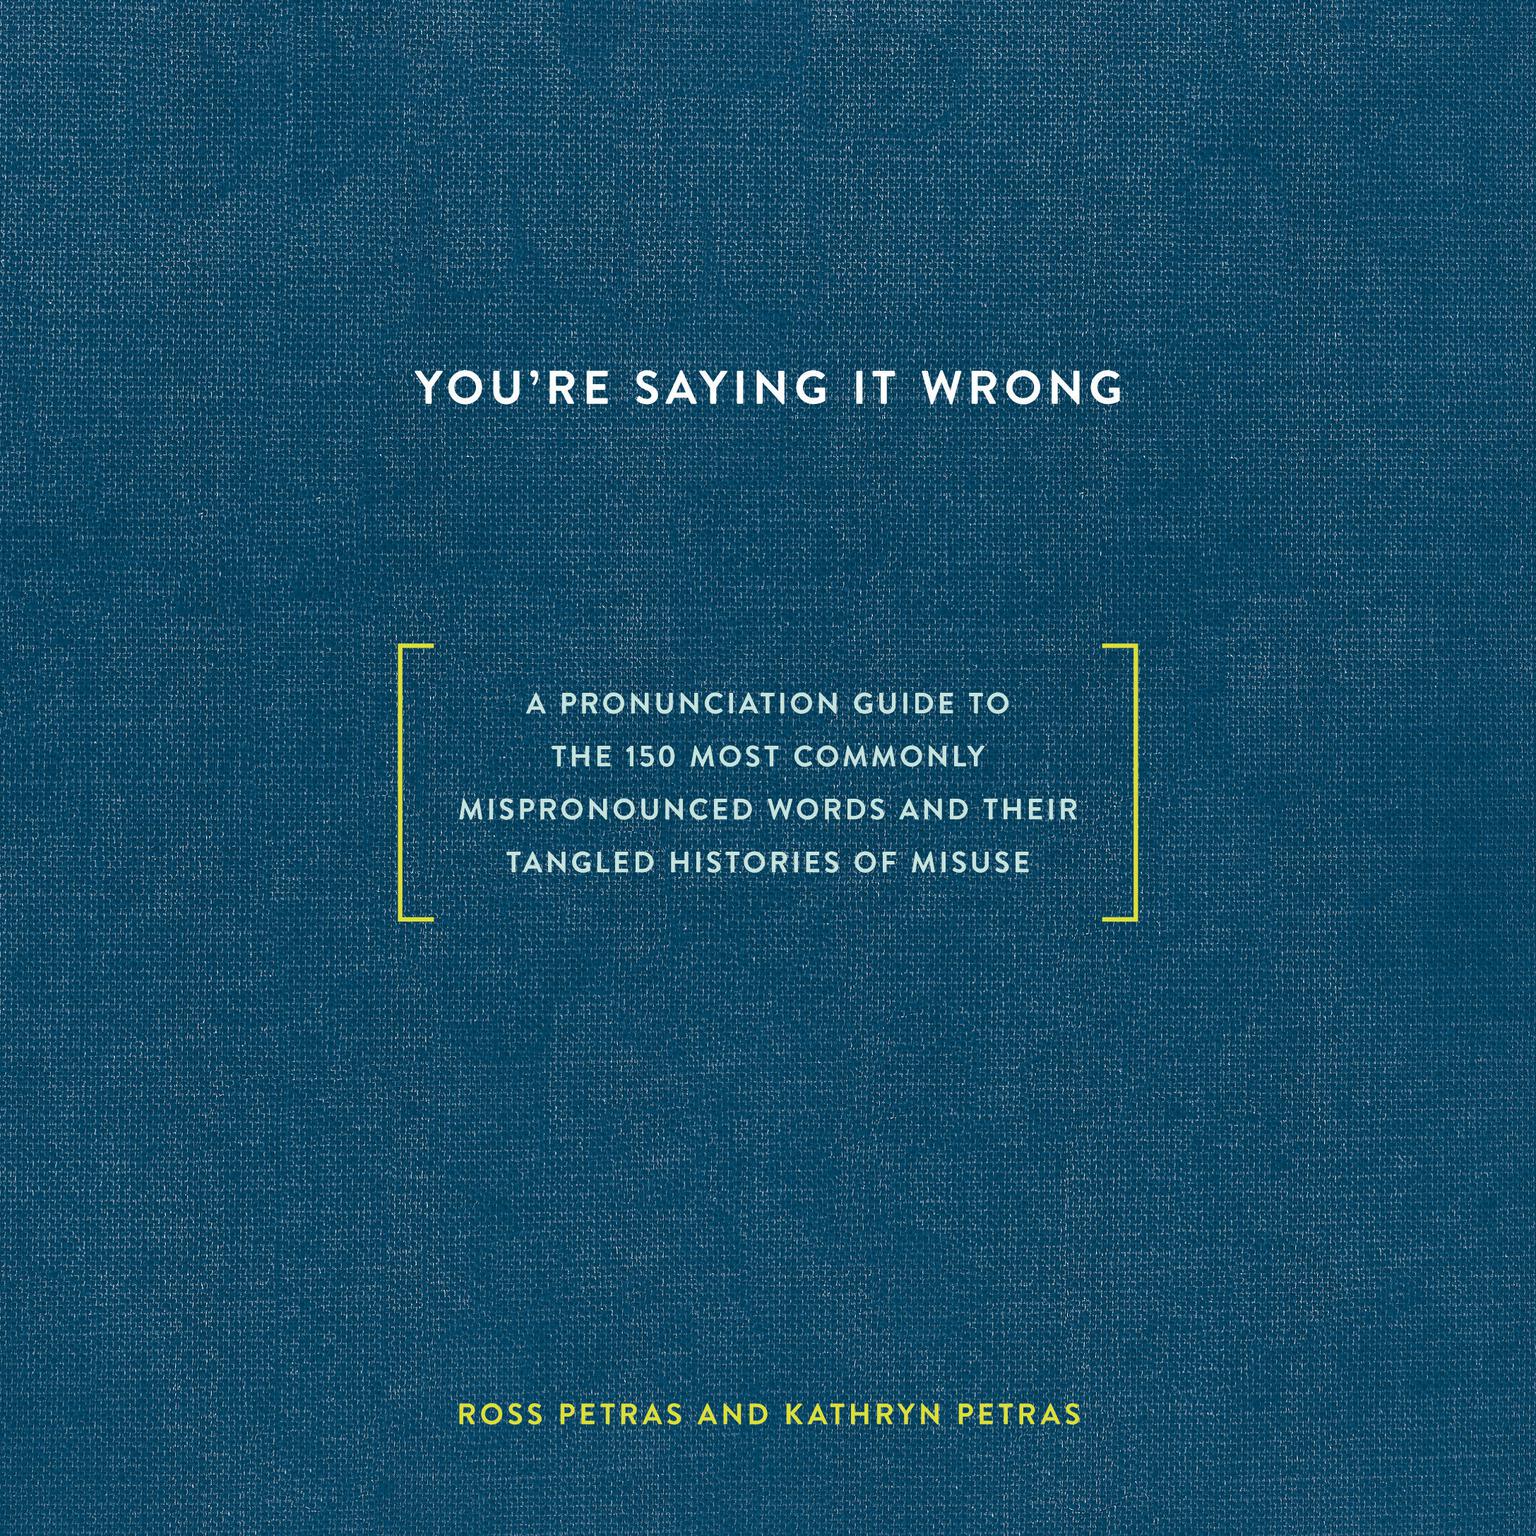 Youre Saying It Wrong: A Pronunciation Guide to the 150 Most Commonly Mispronounced Words--and Their Tangled Histories of Misuse Audiobook, by Kathryn Petras